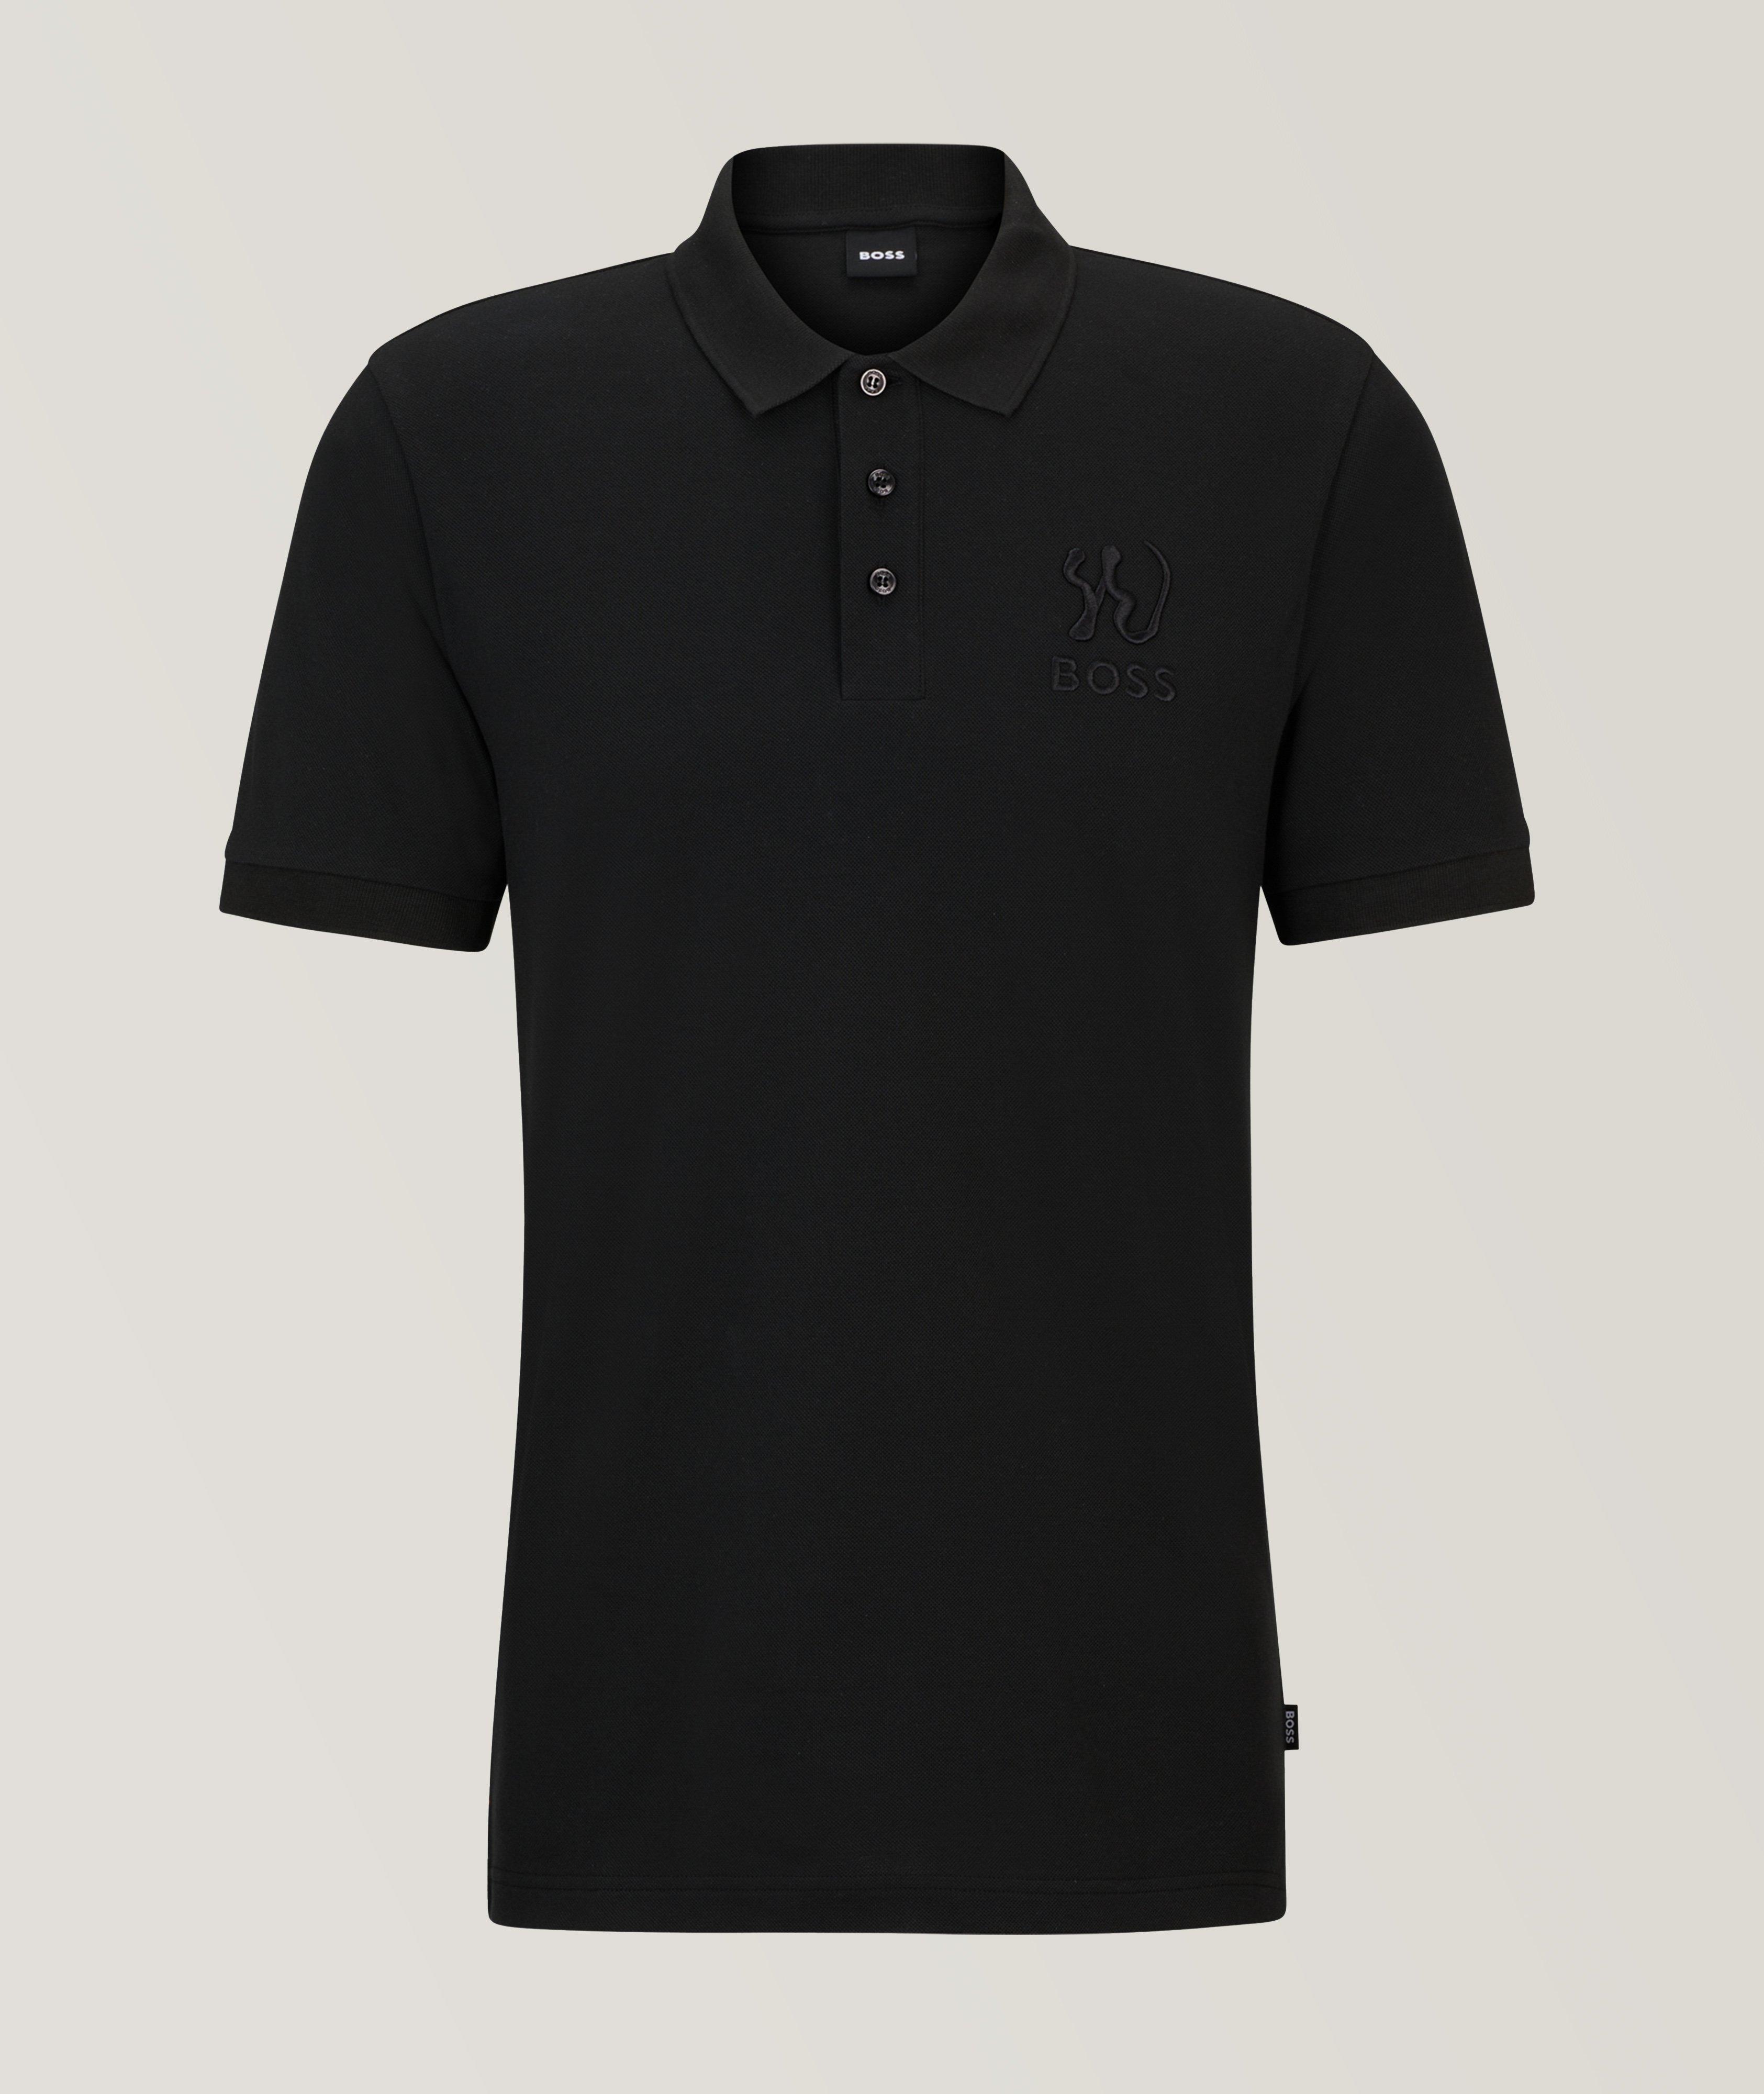 Lunar New Year Collection Mercerized Cotton Polo image 0